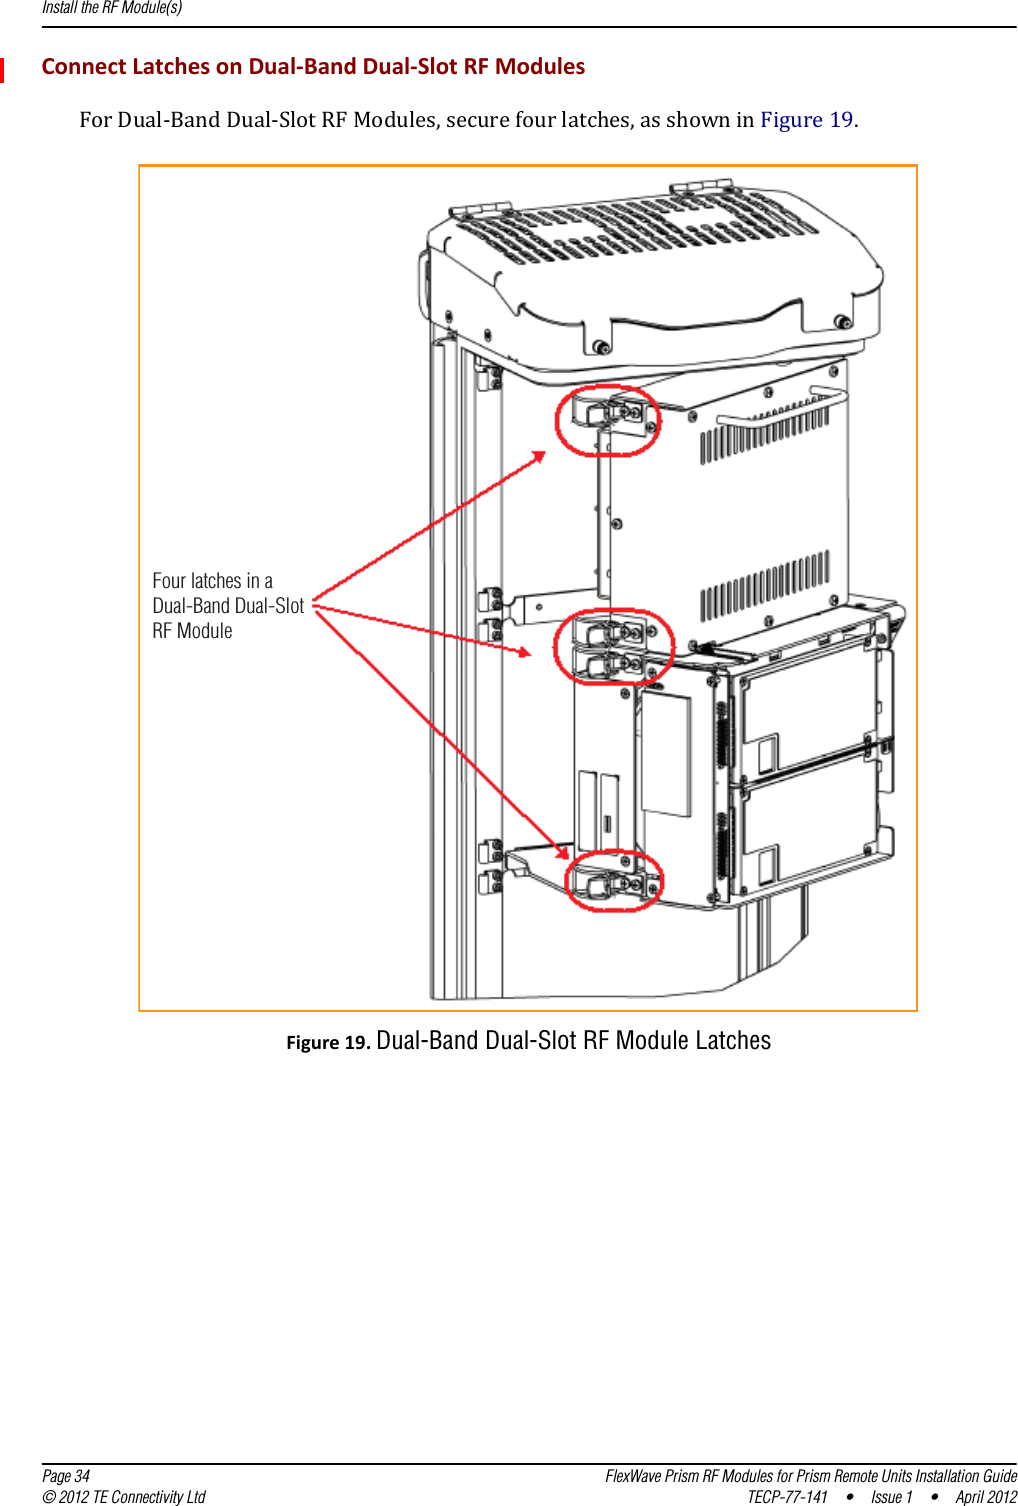 Install the RF Module(s)  Page 34 FlexWave Prism RF Modules for Prism Remote Units Installation Guide© 2012 TE Connectivity Ltd TECP-77-141 • Issue 1 • April 2012ConnectLatchesonDual‐BandDual‐SlotRFModulesForDual‐BandDual‐SlotRFModules,securefourlatches,asshowninFigure19.Four latches in aDual-Band Dual-SlotRF ModuleFigure19.Dual-Band Dual-Slot RF Module Latches